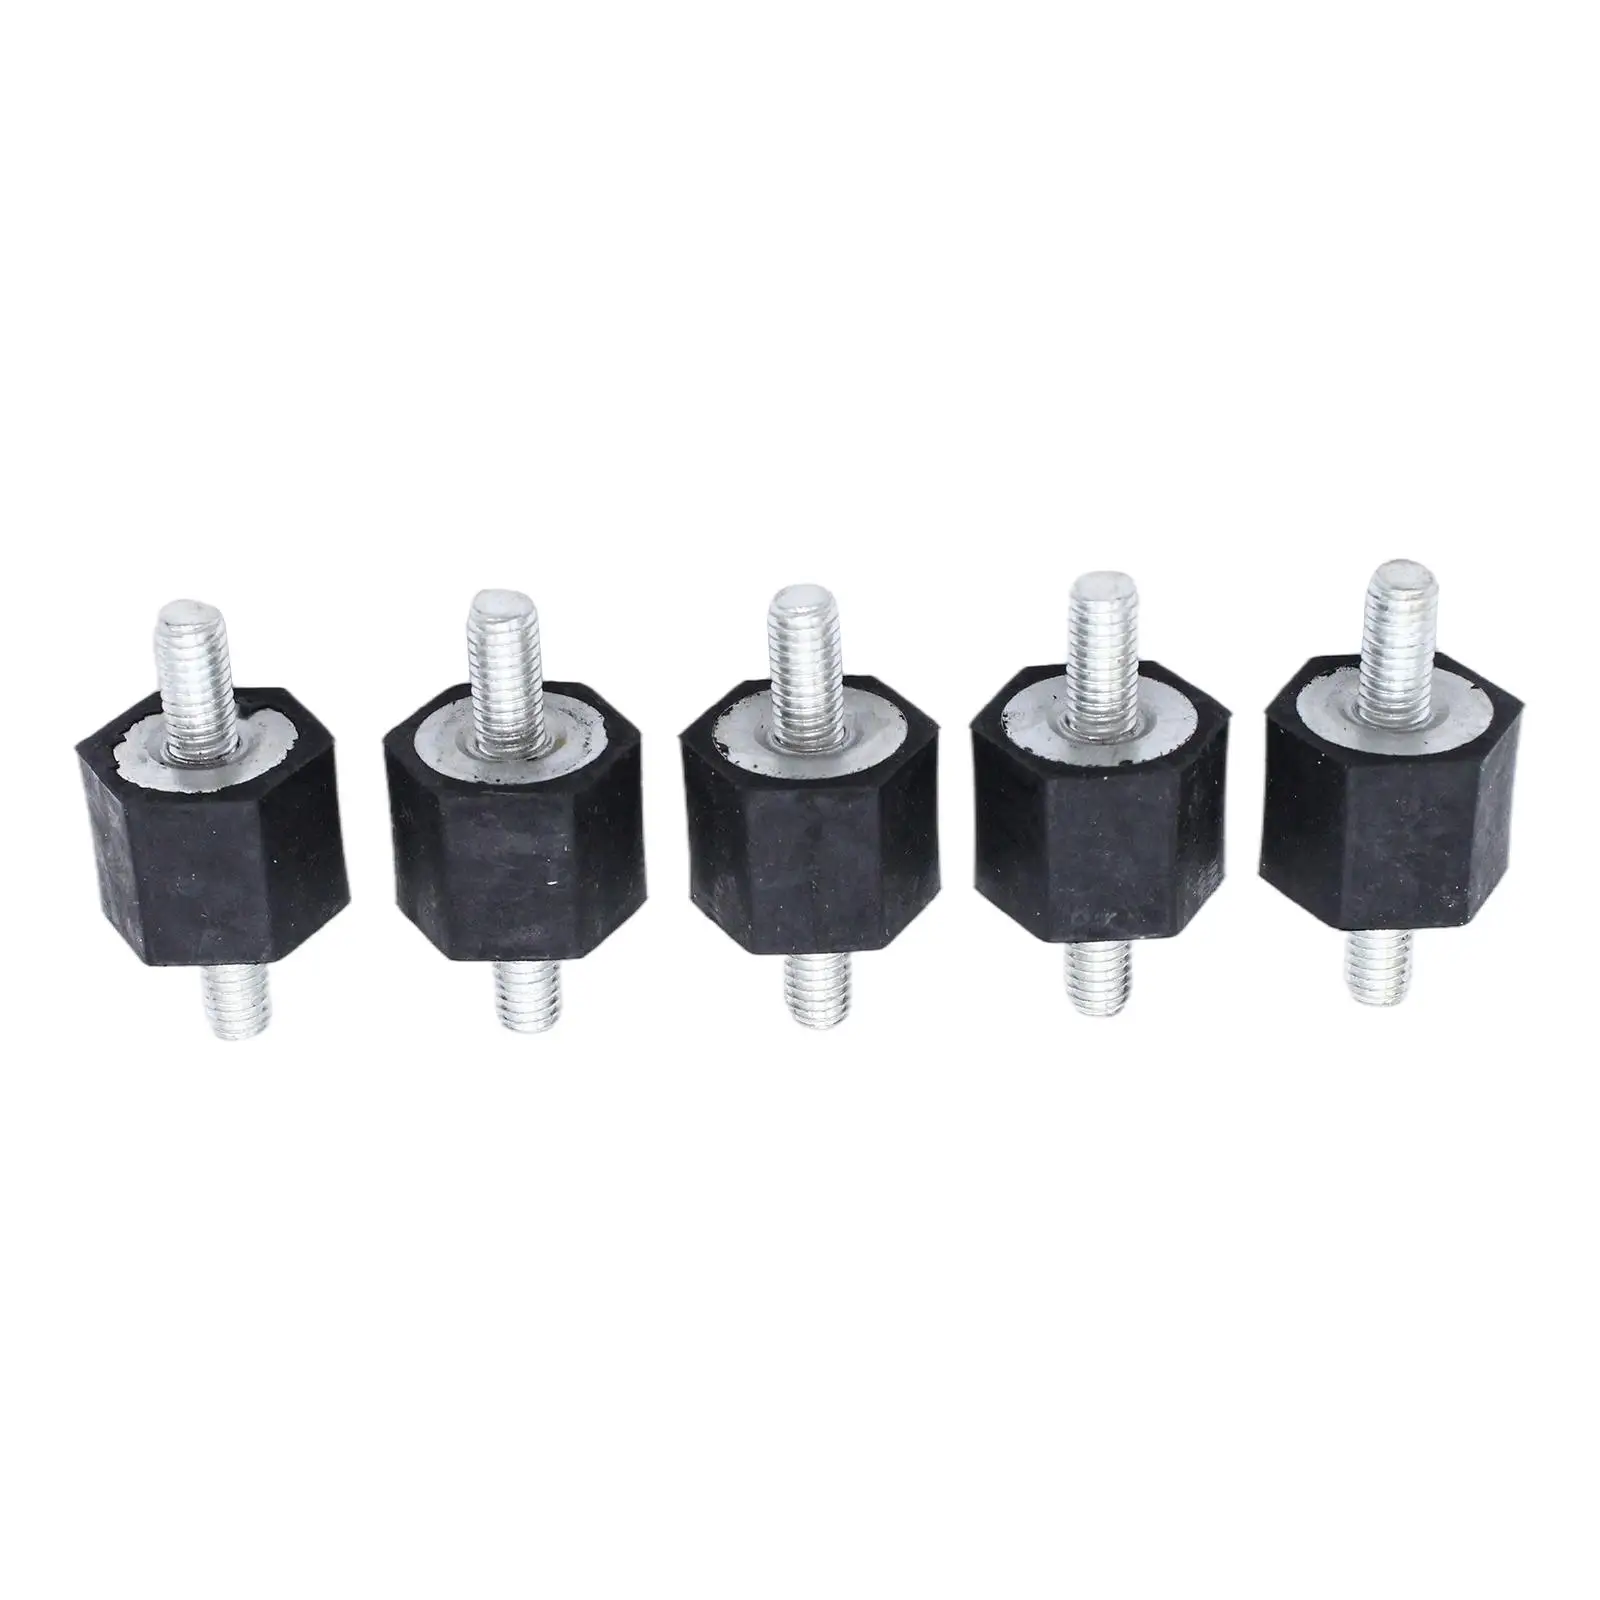 5x Rubber Mounts Shock Absorbers for Golf MK2 for B4 Front Mount Intercoolers